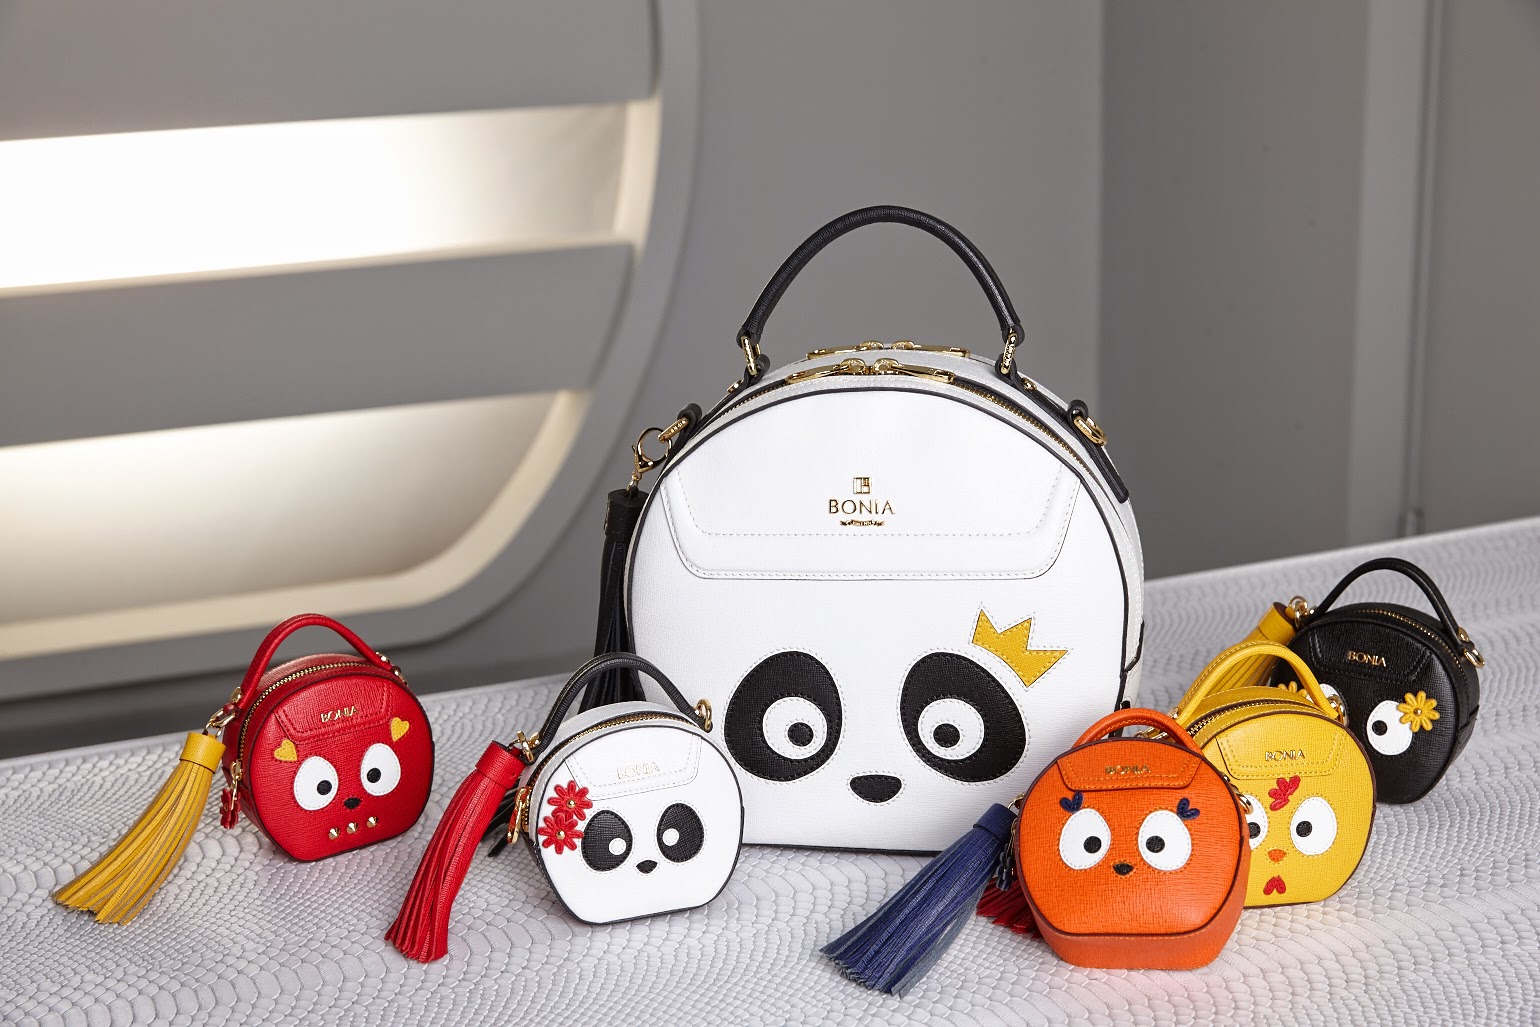 Kee Hua Chee Live!: BONIA GEARS UP FOR CHINESE NEW YEAR WITH THESE ADORABLE  MINI BAGS! COLLECT 1, COLLECT THEM ALL!